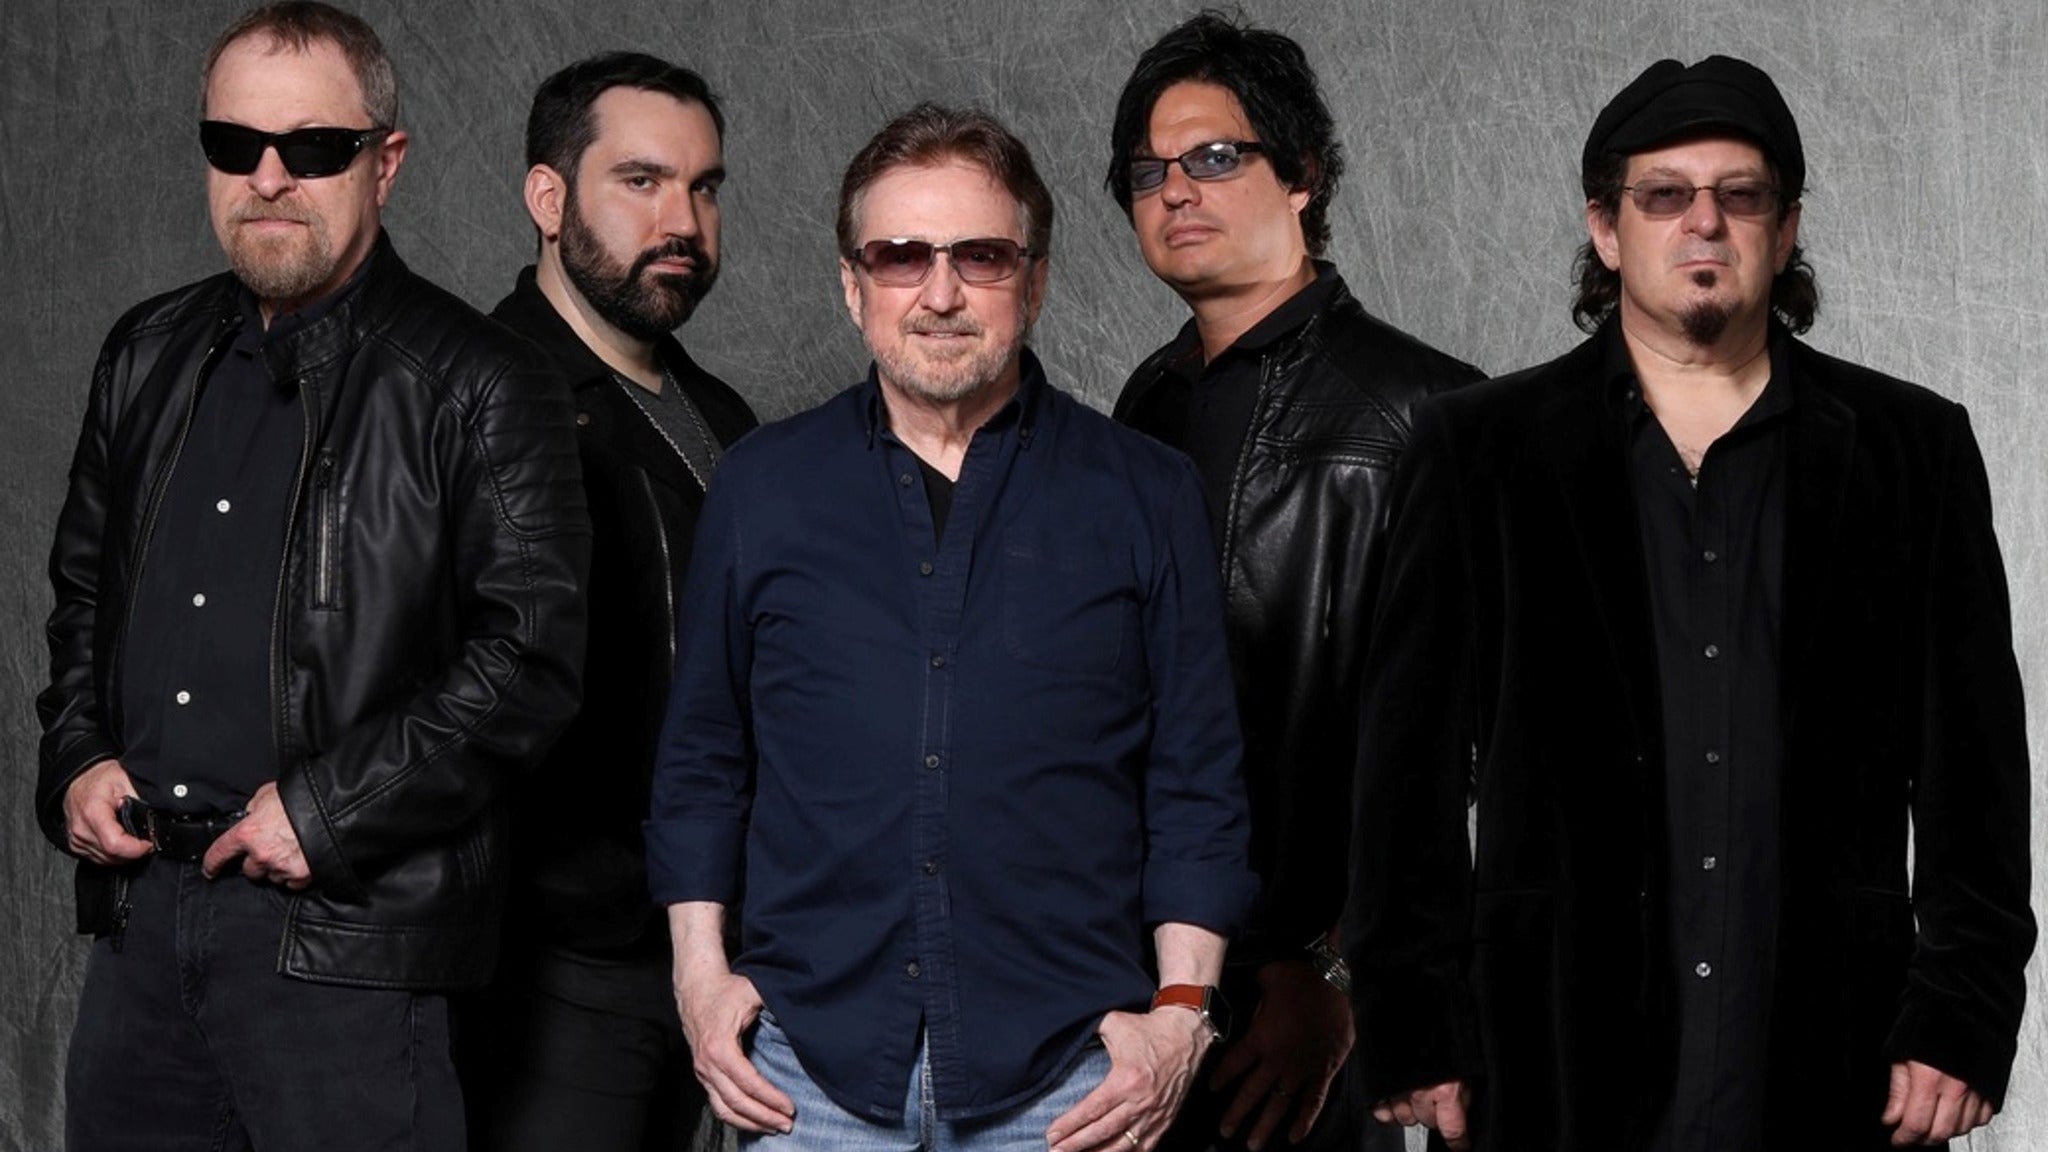 Blue oYster Cult Wallpapers